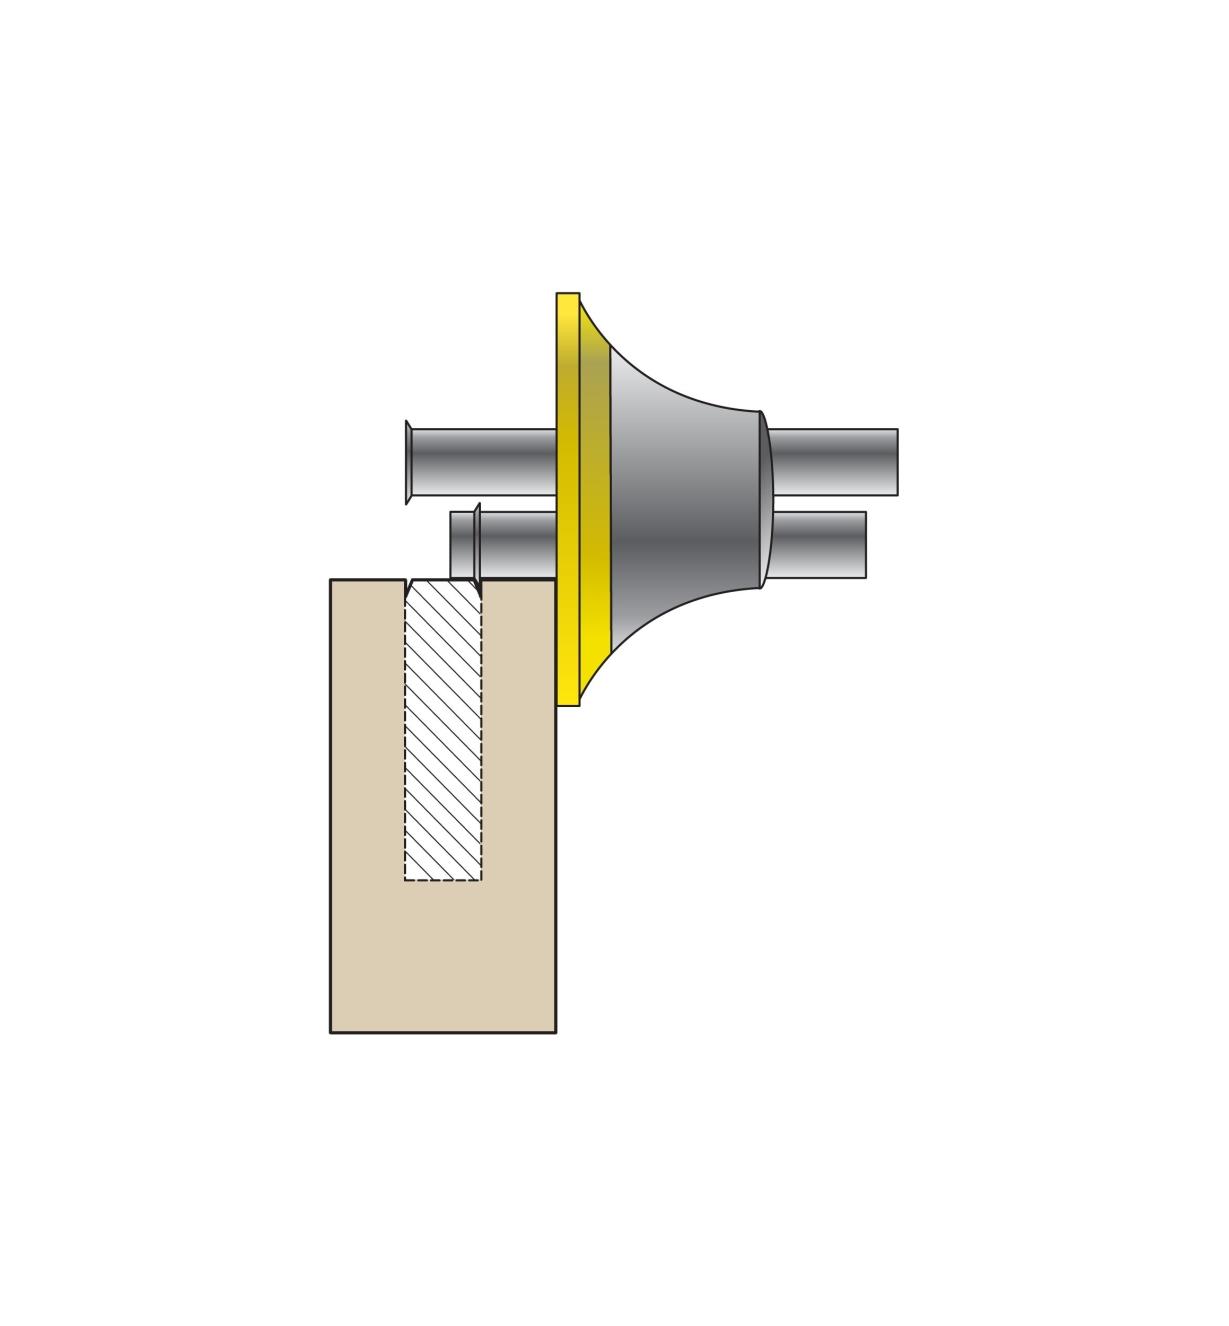 Illustration showing cutting-wheel bevels oriented to mark a mortise